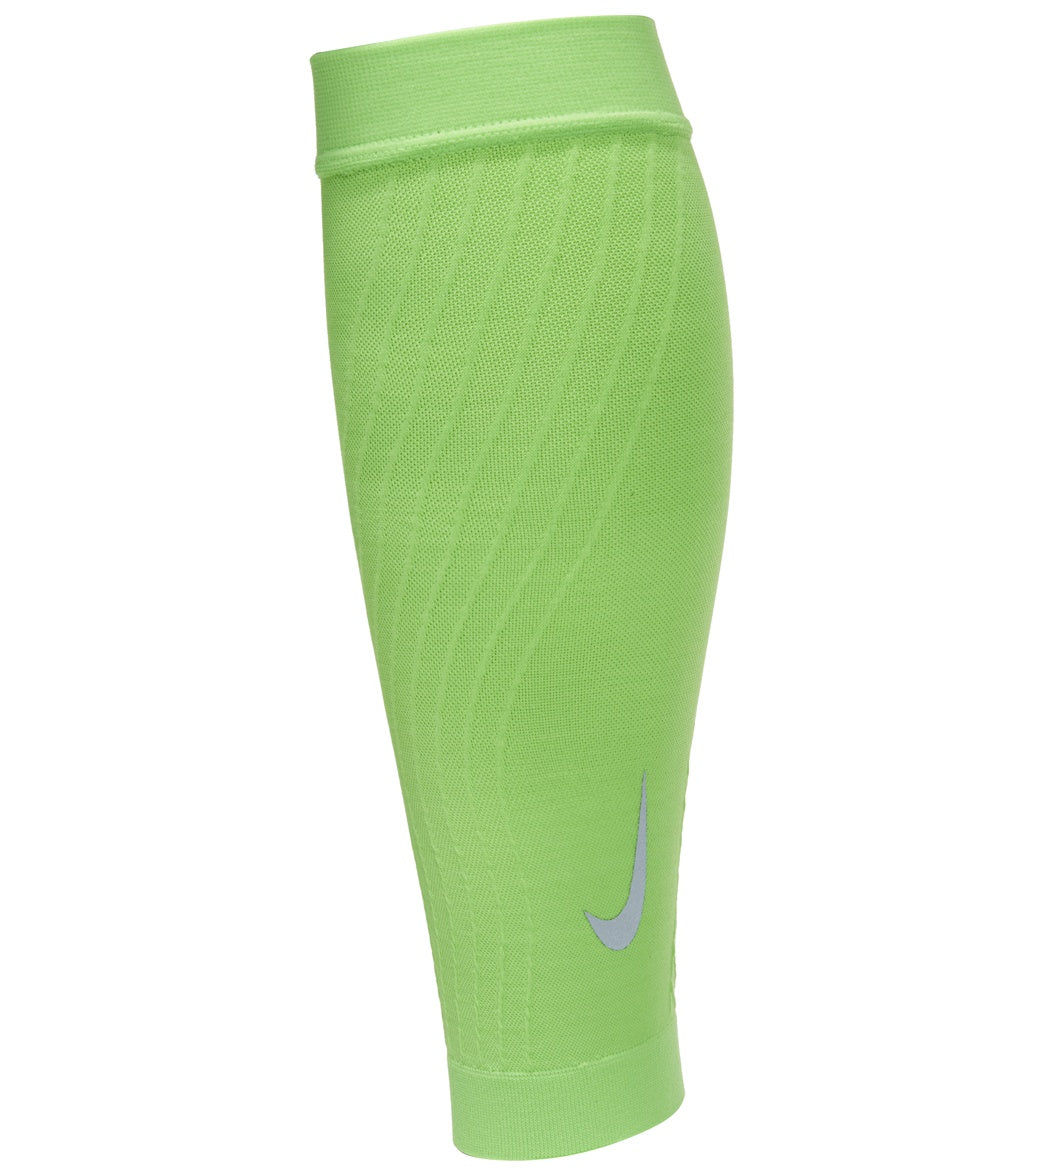 Nike Zoned Support Calf Sleeves - Electric Green/Silver Medium - Swimoutlet.com